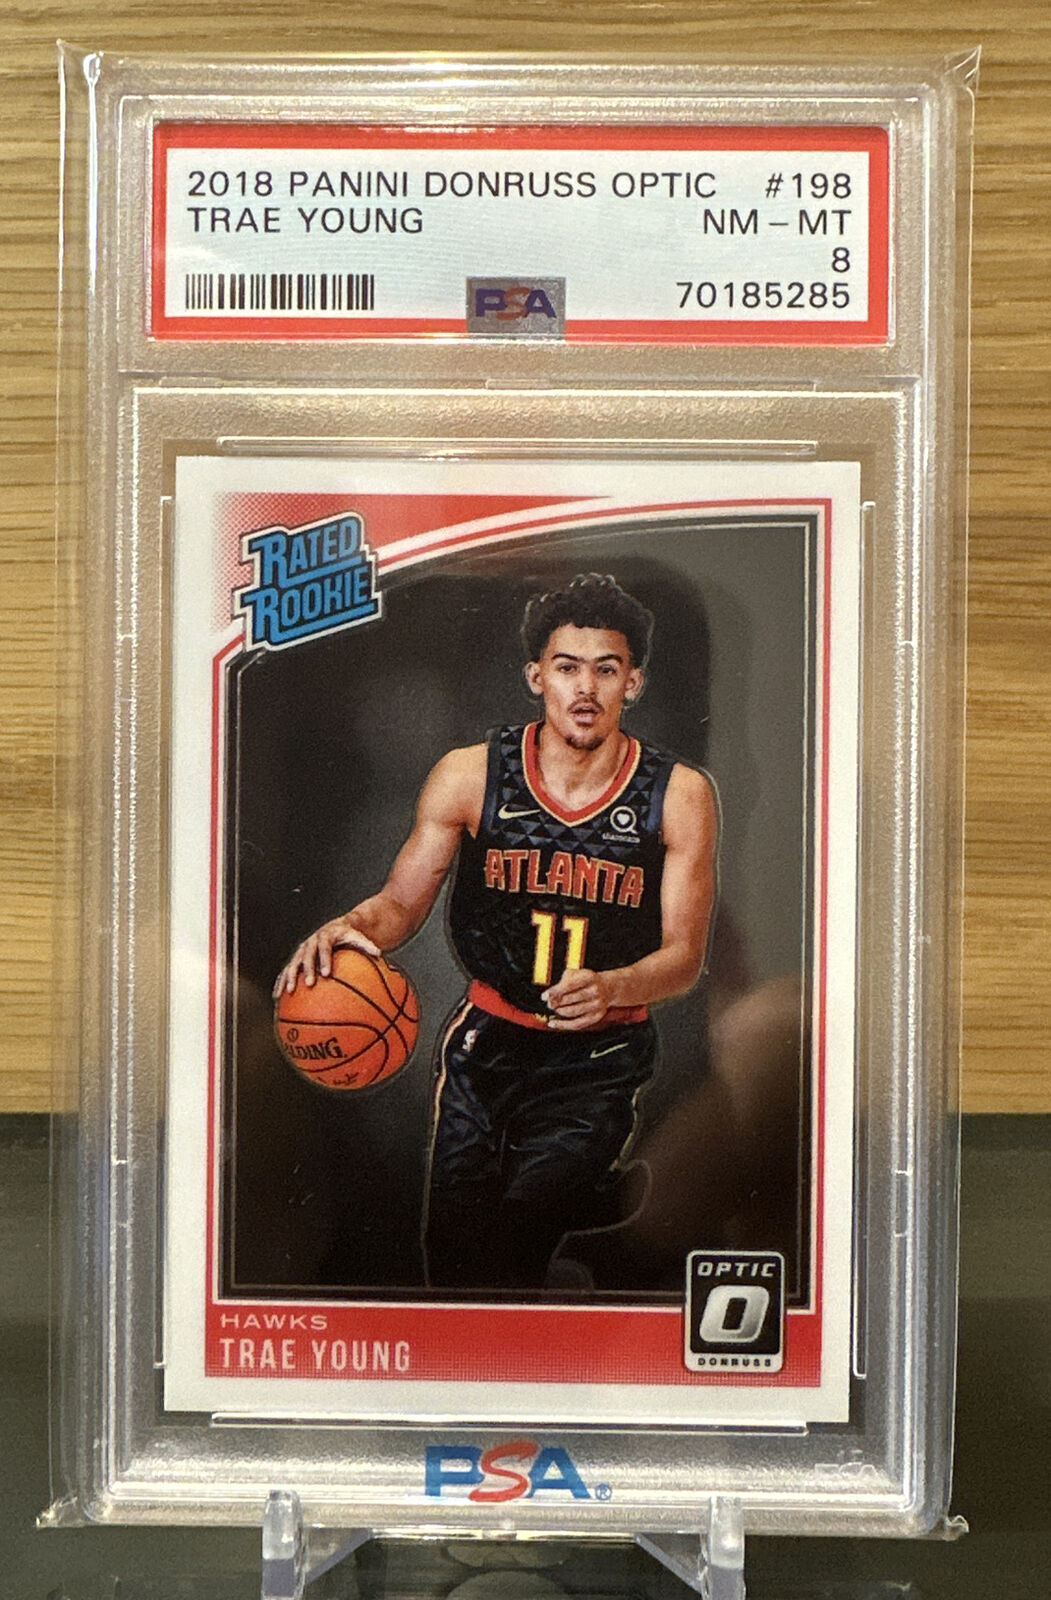 TRAE YOUNG 2018 Panini Donruss Optic #198 Rated Rookie RC PSA 8 Hawks